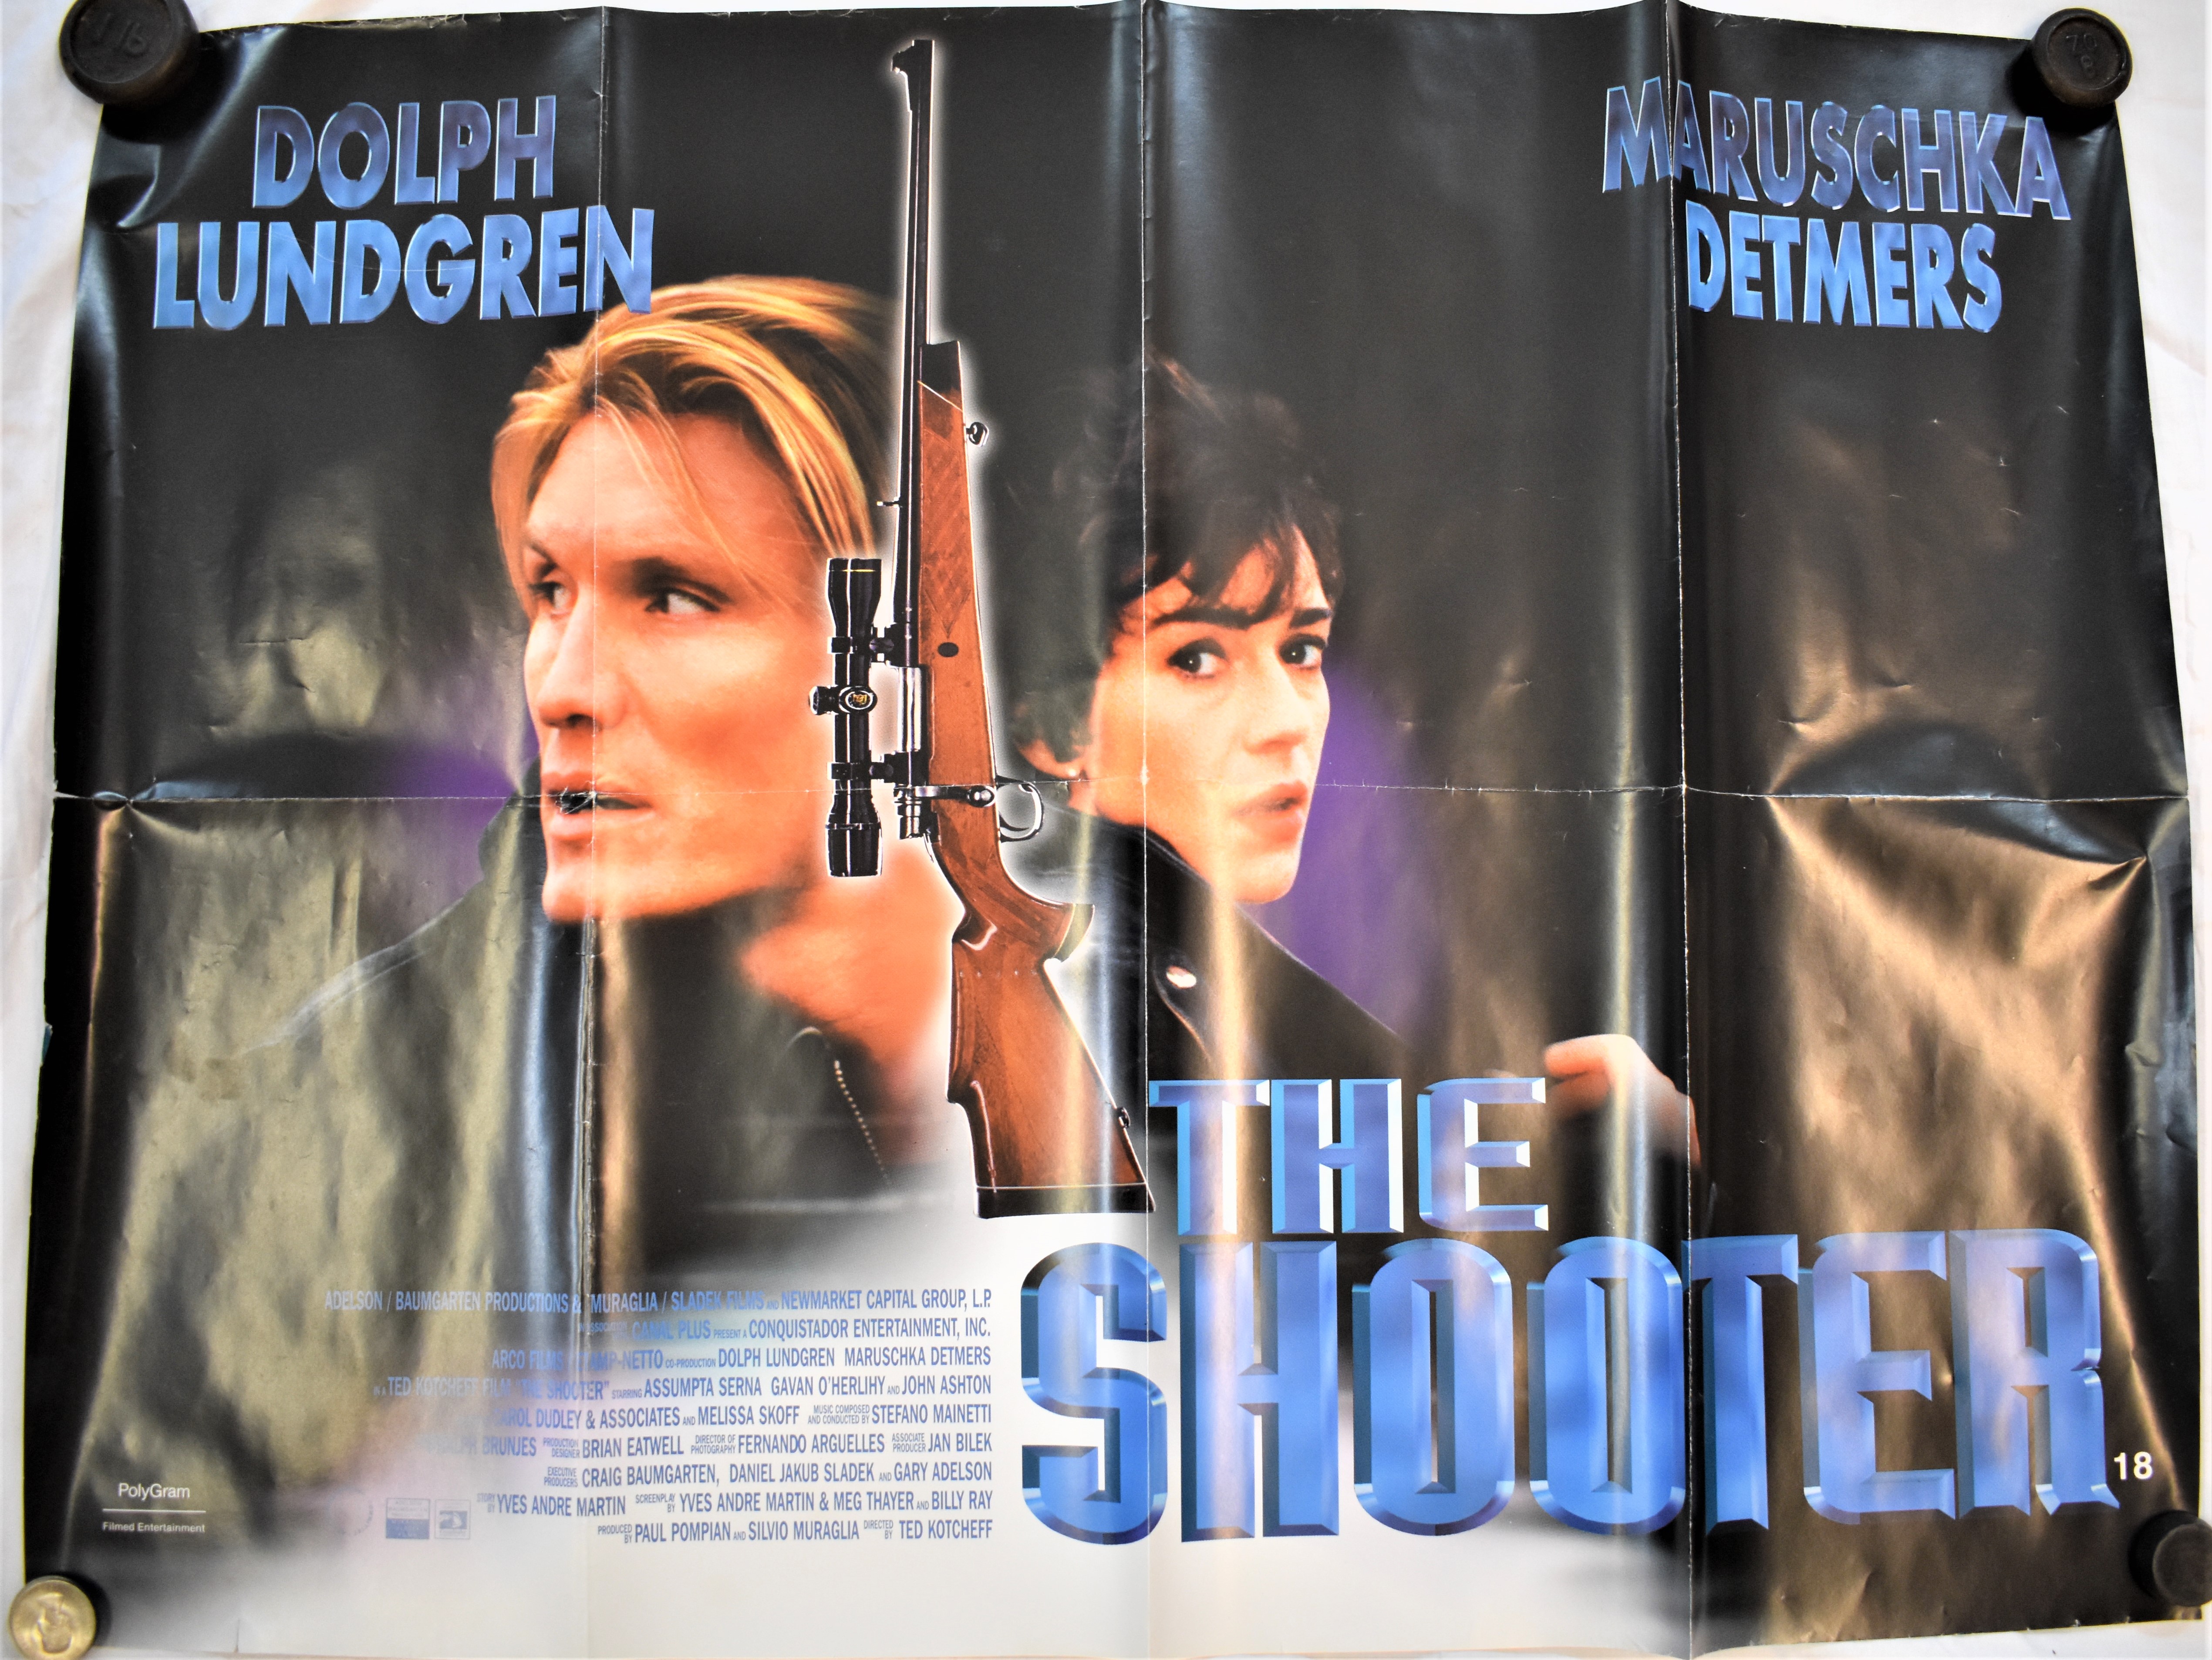 Film Posters (5) 'The Shooter' starring Dolph Lundgren & Makuschka Detmers, double sided poster. - Image 5 of 5